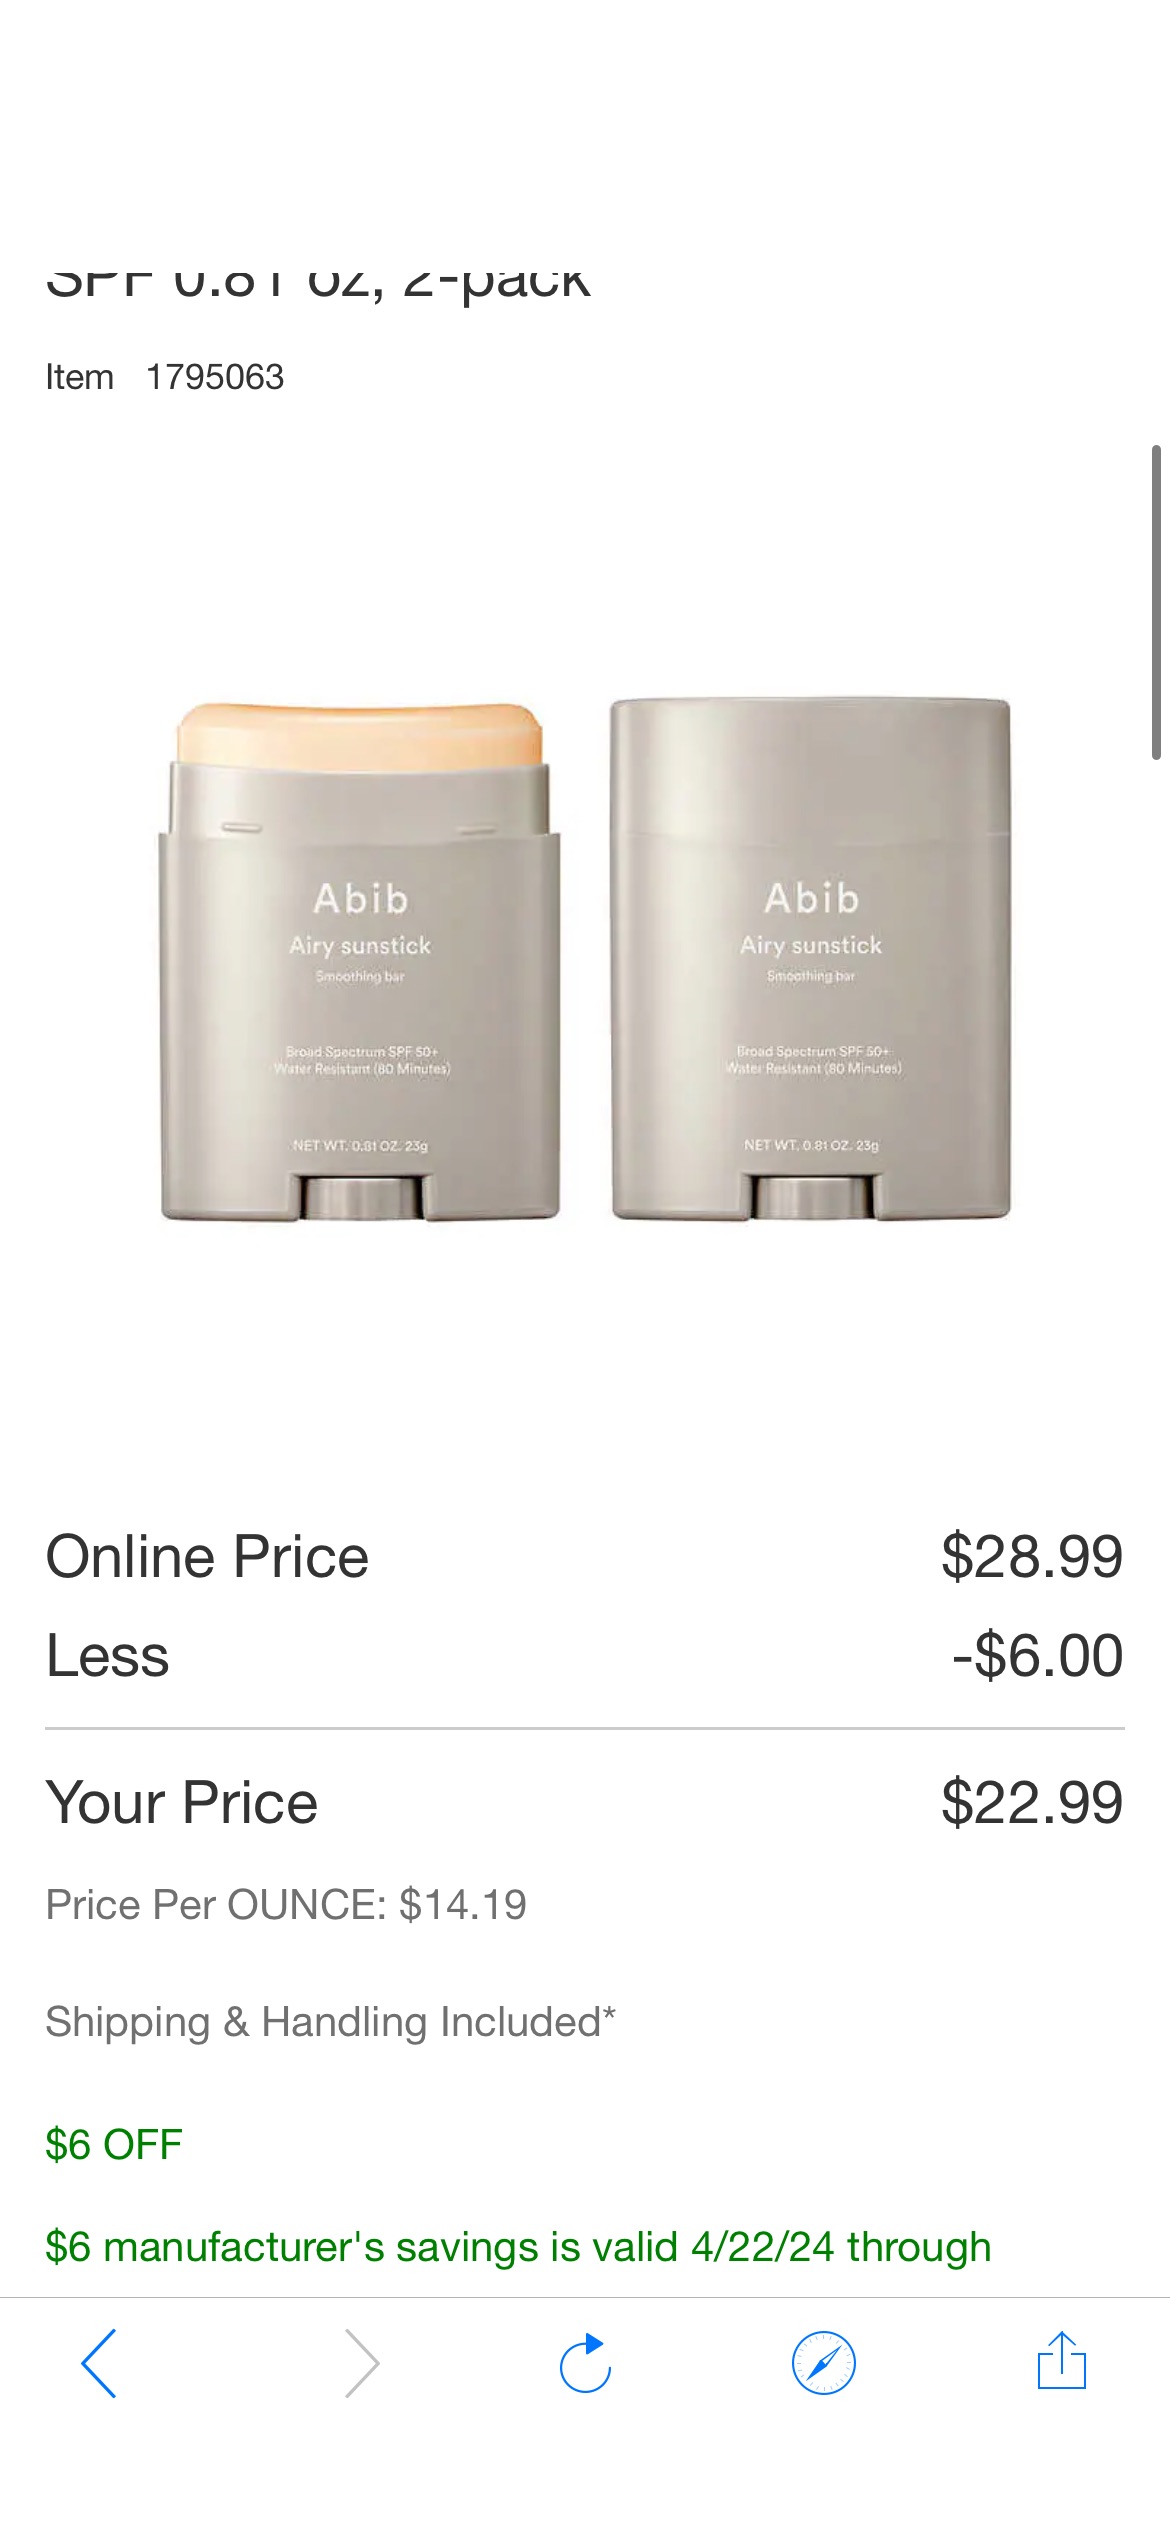 Abib Airy Sunstick Smoothing Bar 50 SPF 0.81 oz, 2-pack | Costco